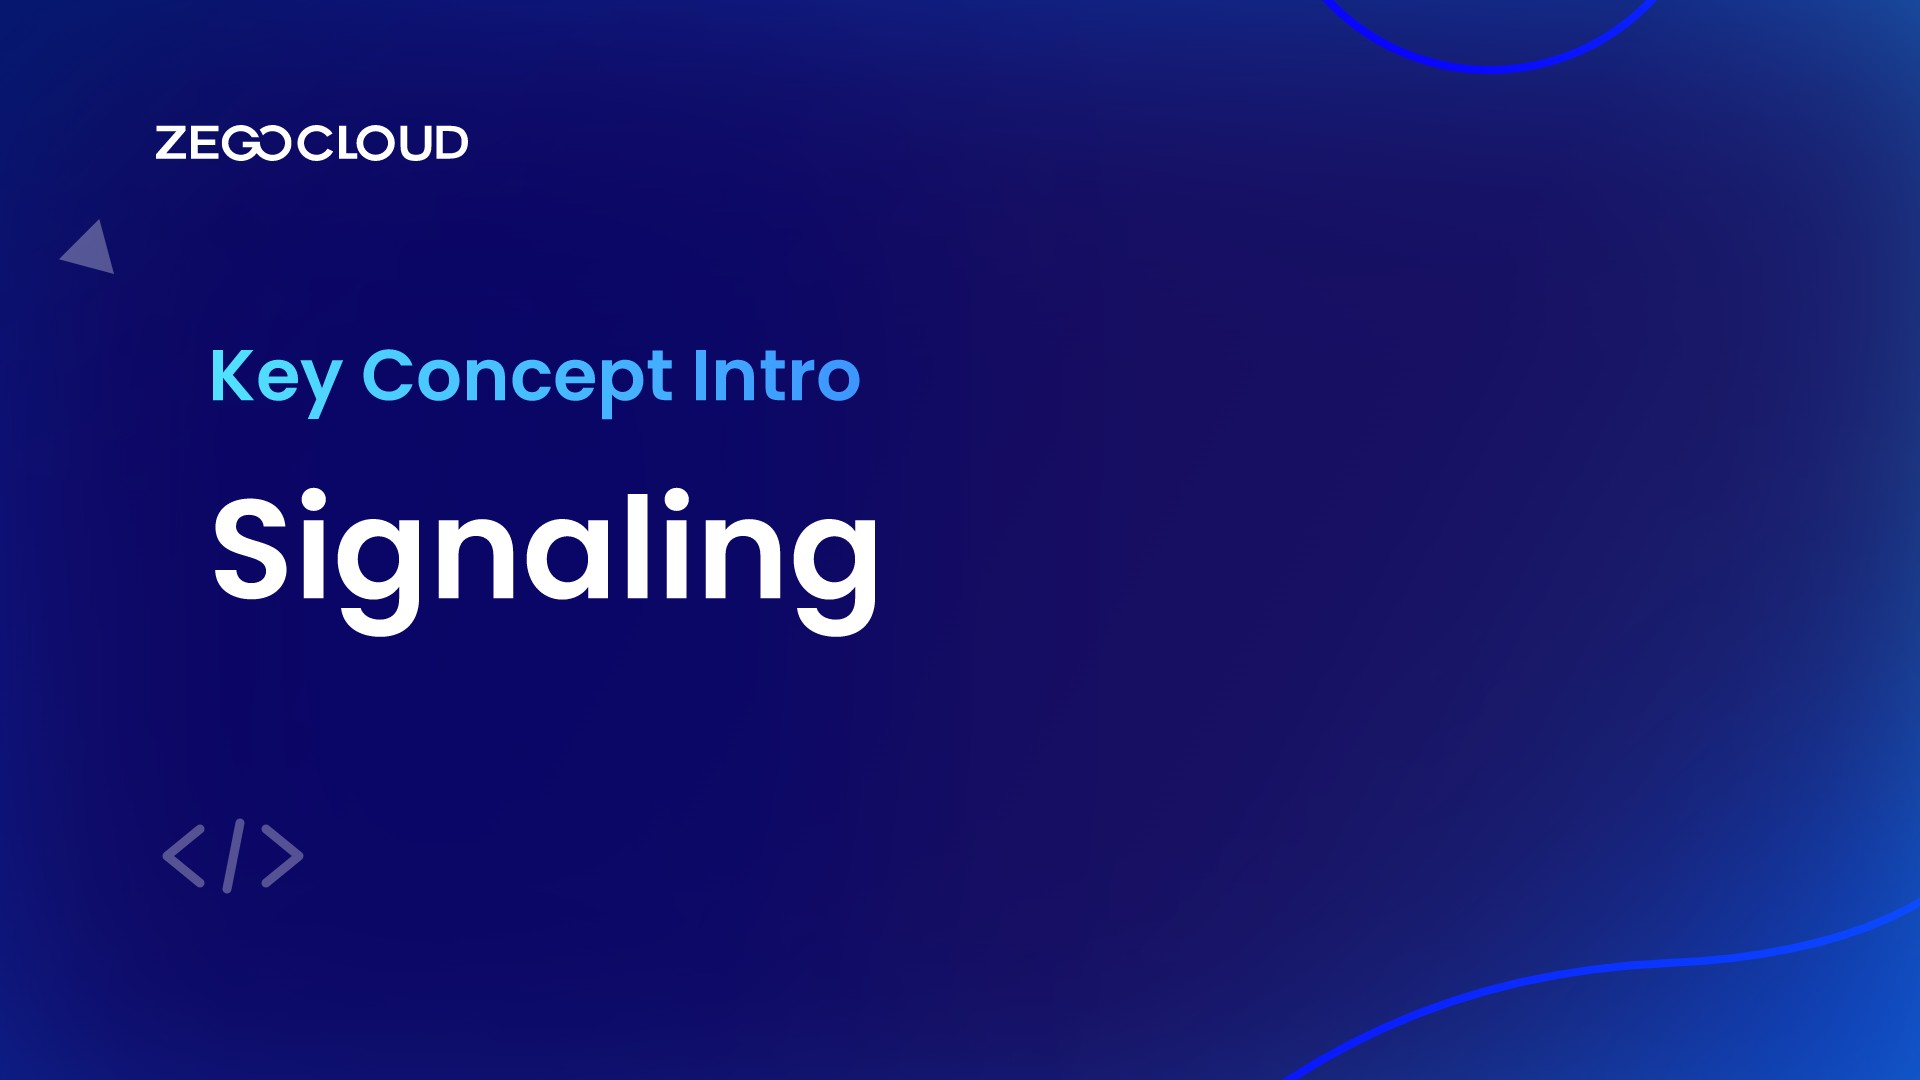 ZEGOCLOUD Key Concept Intro: What is Signaling?